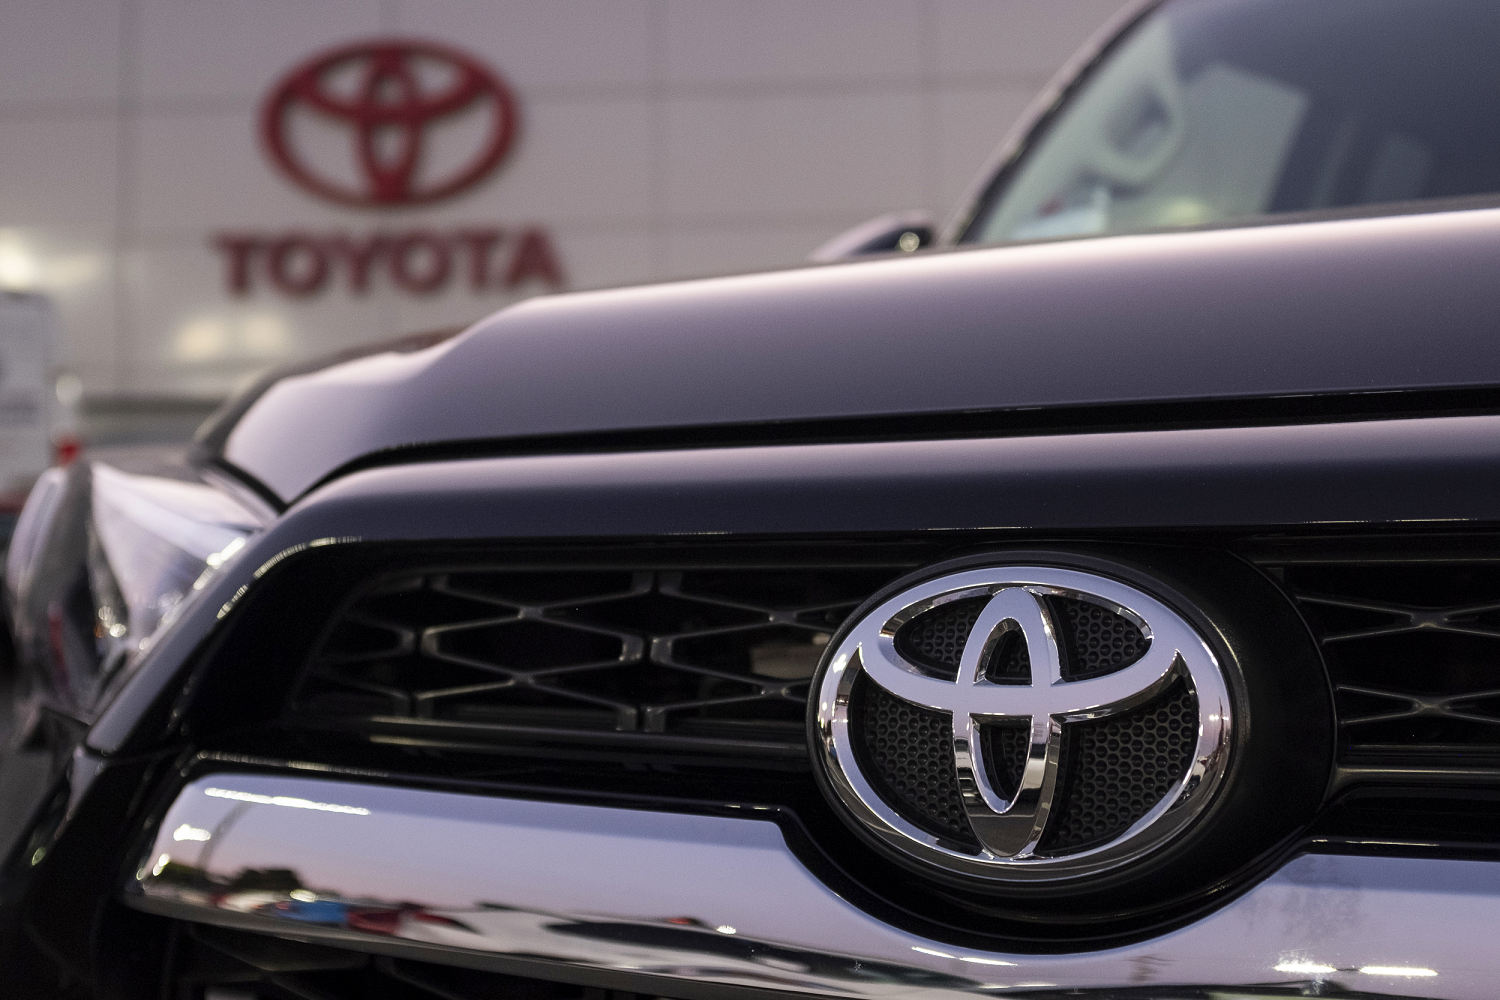 Toyota’s credit business is fined $60M for saddling customers with overloaded loans